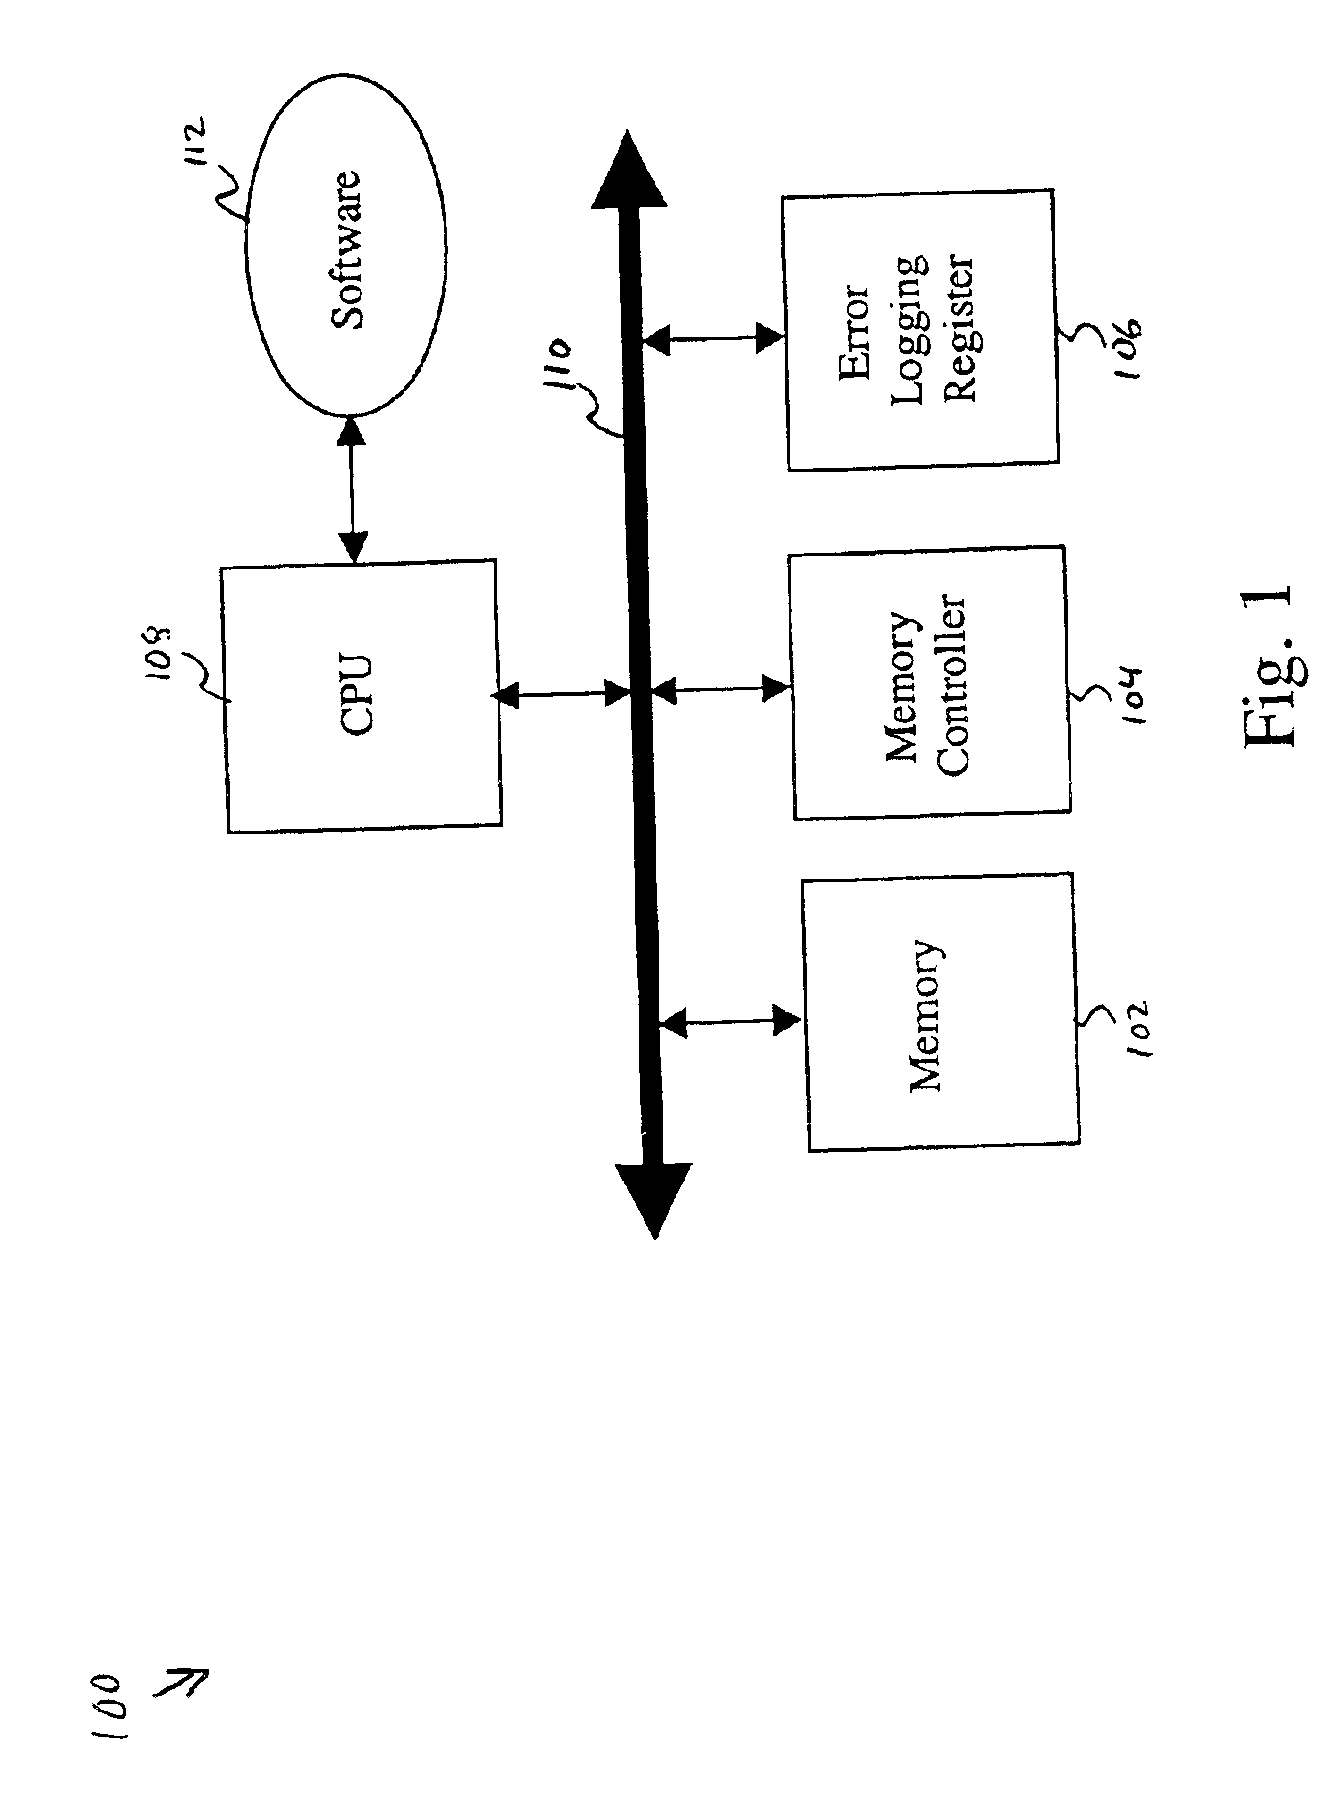 System and method for recovering from memory failures in computer systems